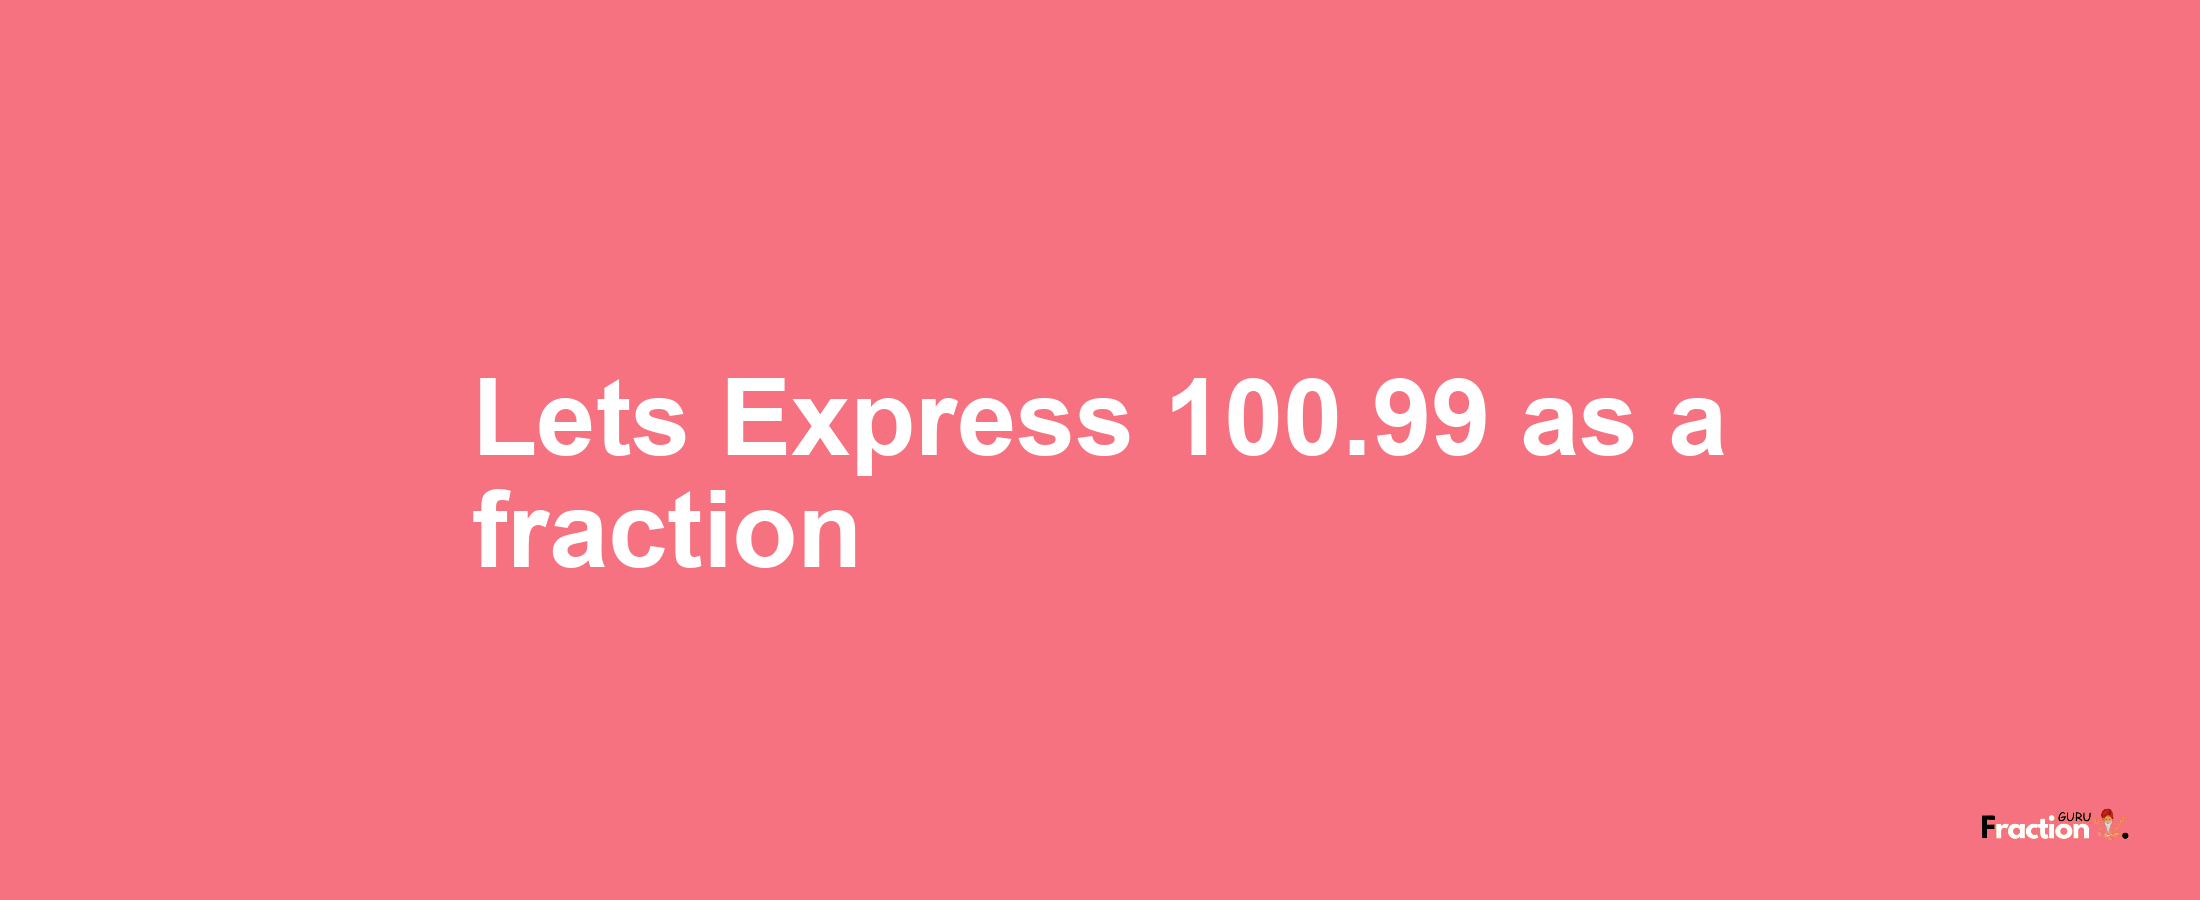 Lets Express 100.99 as afraction